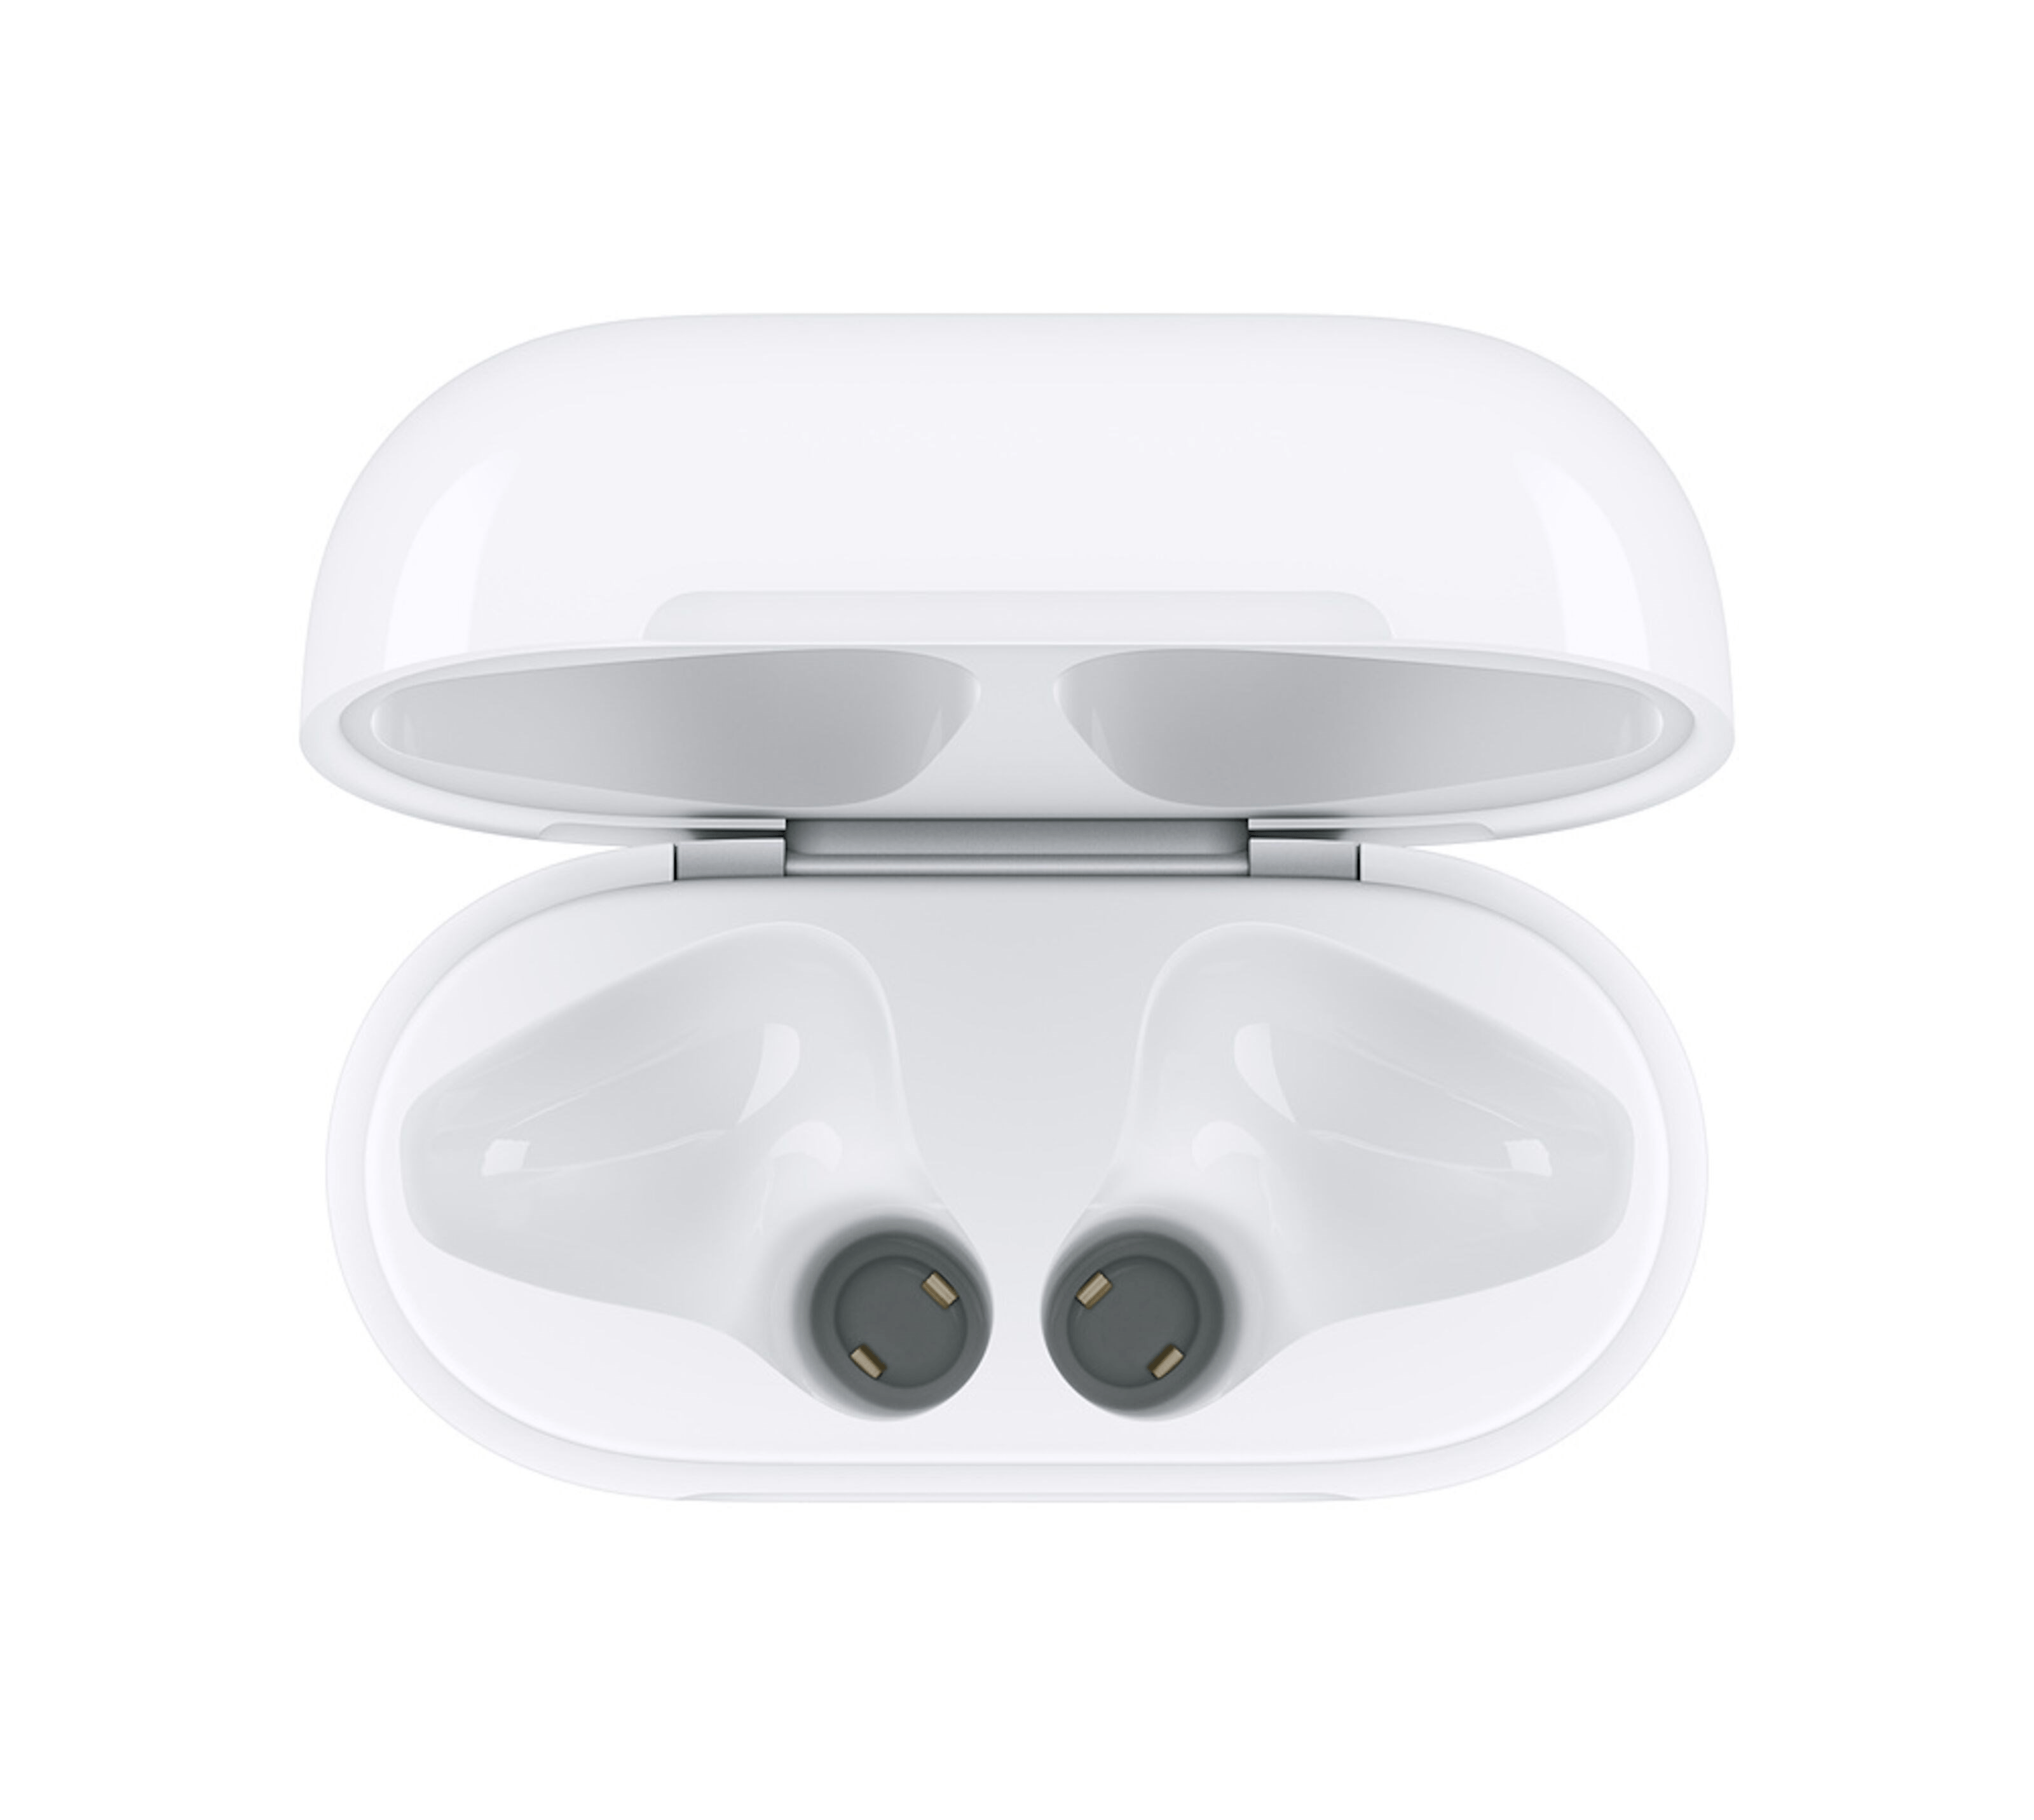 How to Fix AirPods Won't Reset